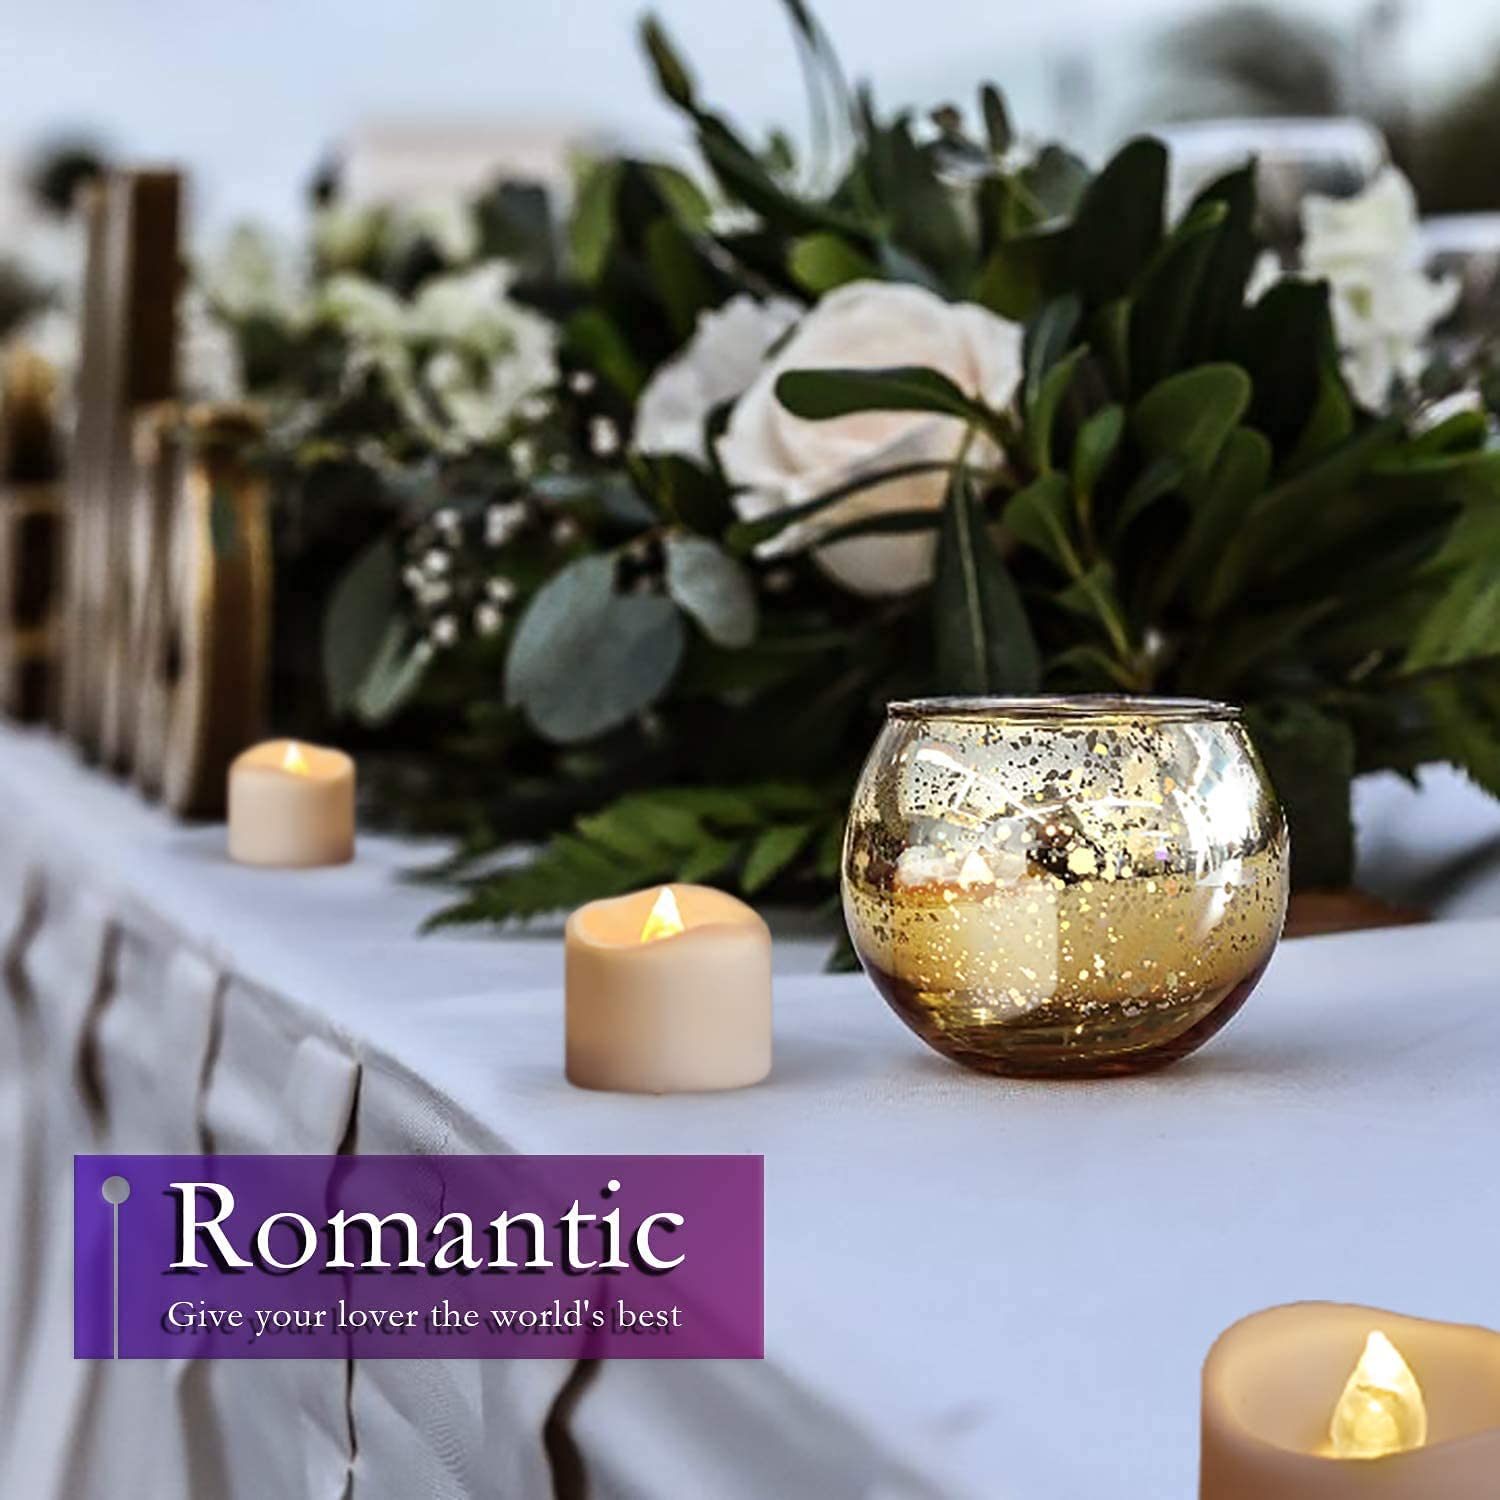 Flameless Tea Lights Candles. Last 5days Longer Battery Operated LED Votive Candles. 12 pcs Flickering Tealights with Warm White Light for Wedding. Valentine's Day. Halloween. Christmas